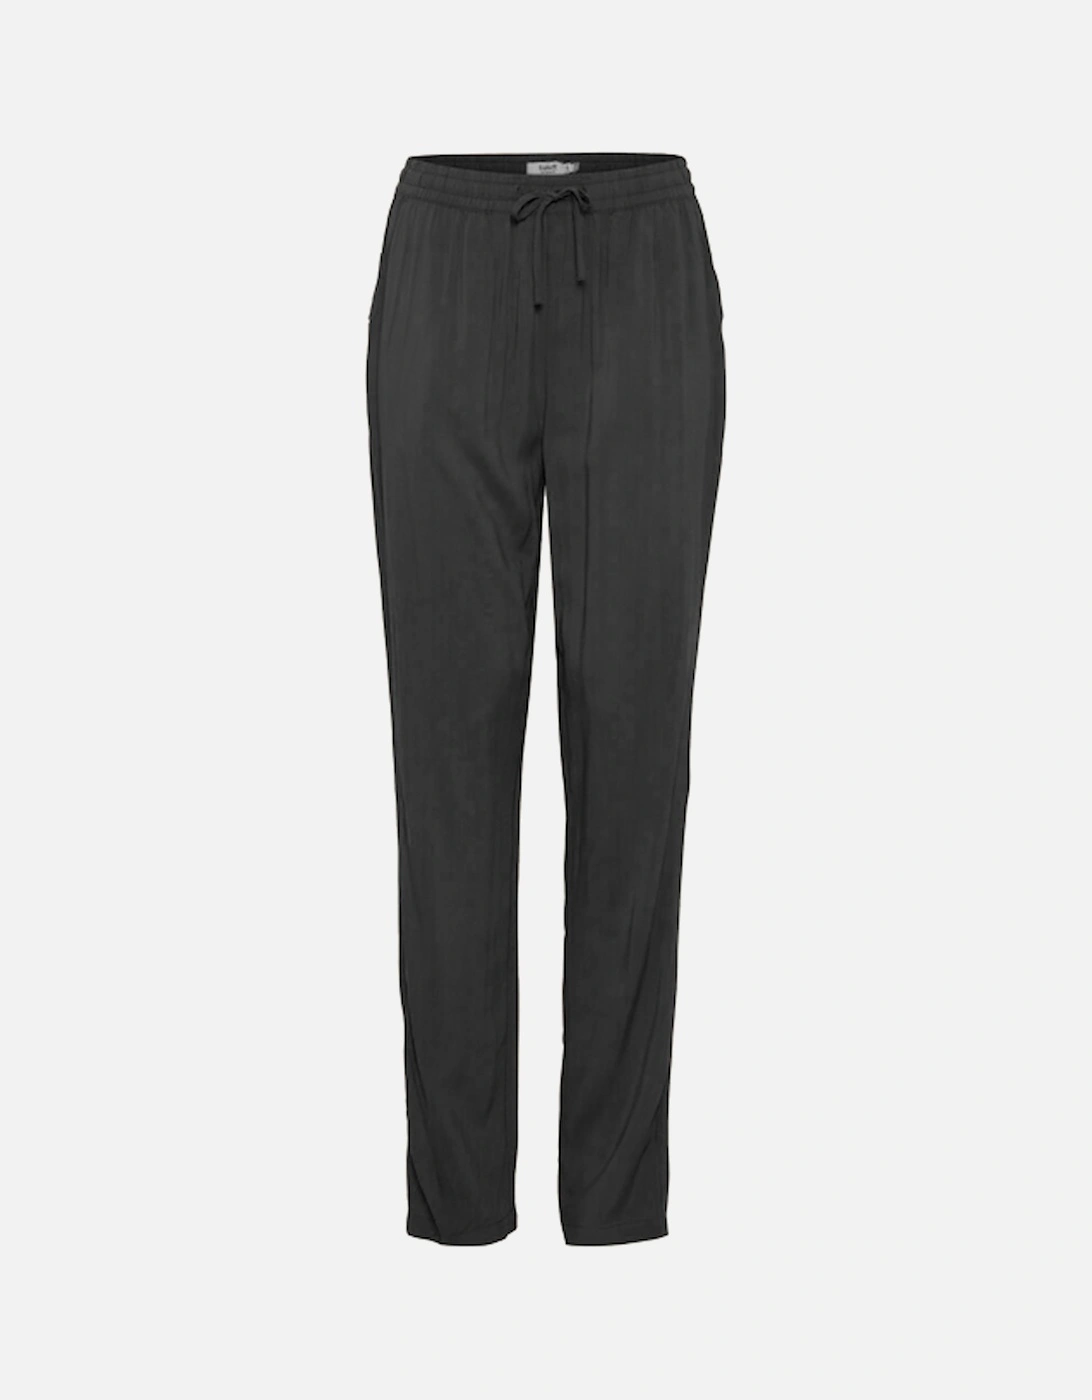 B Young Women's Bymmjoella Trousers Black, 4 of 3